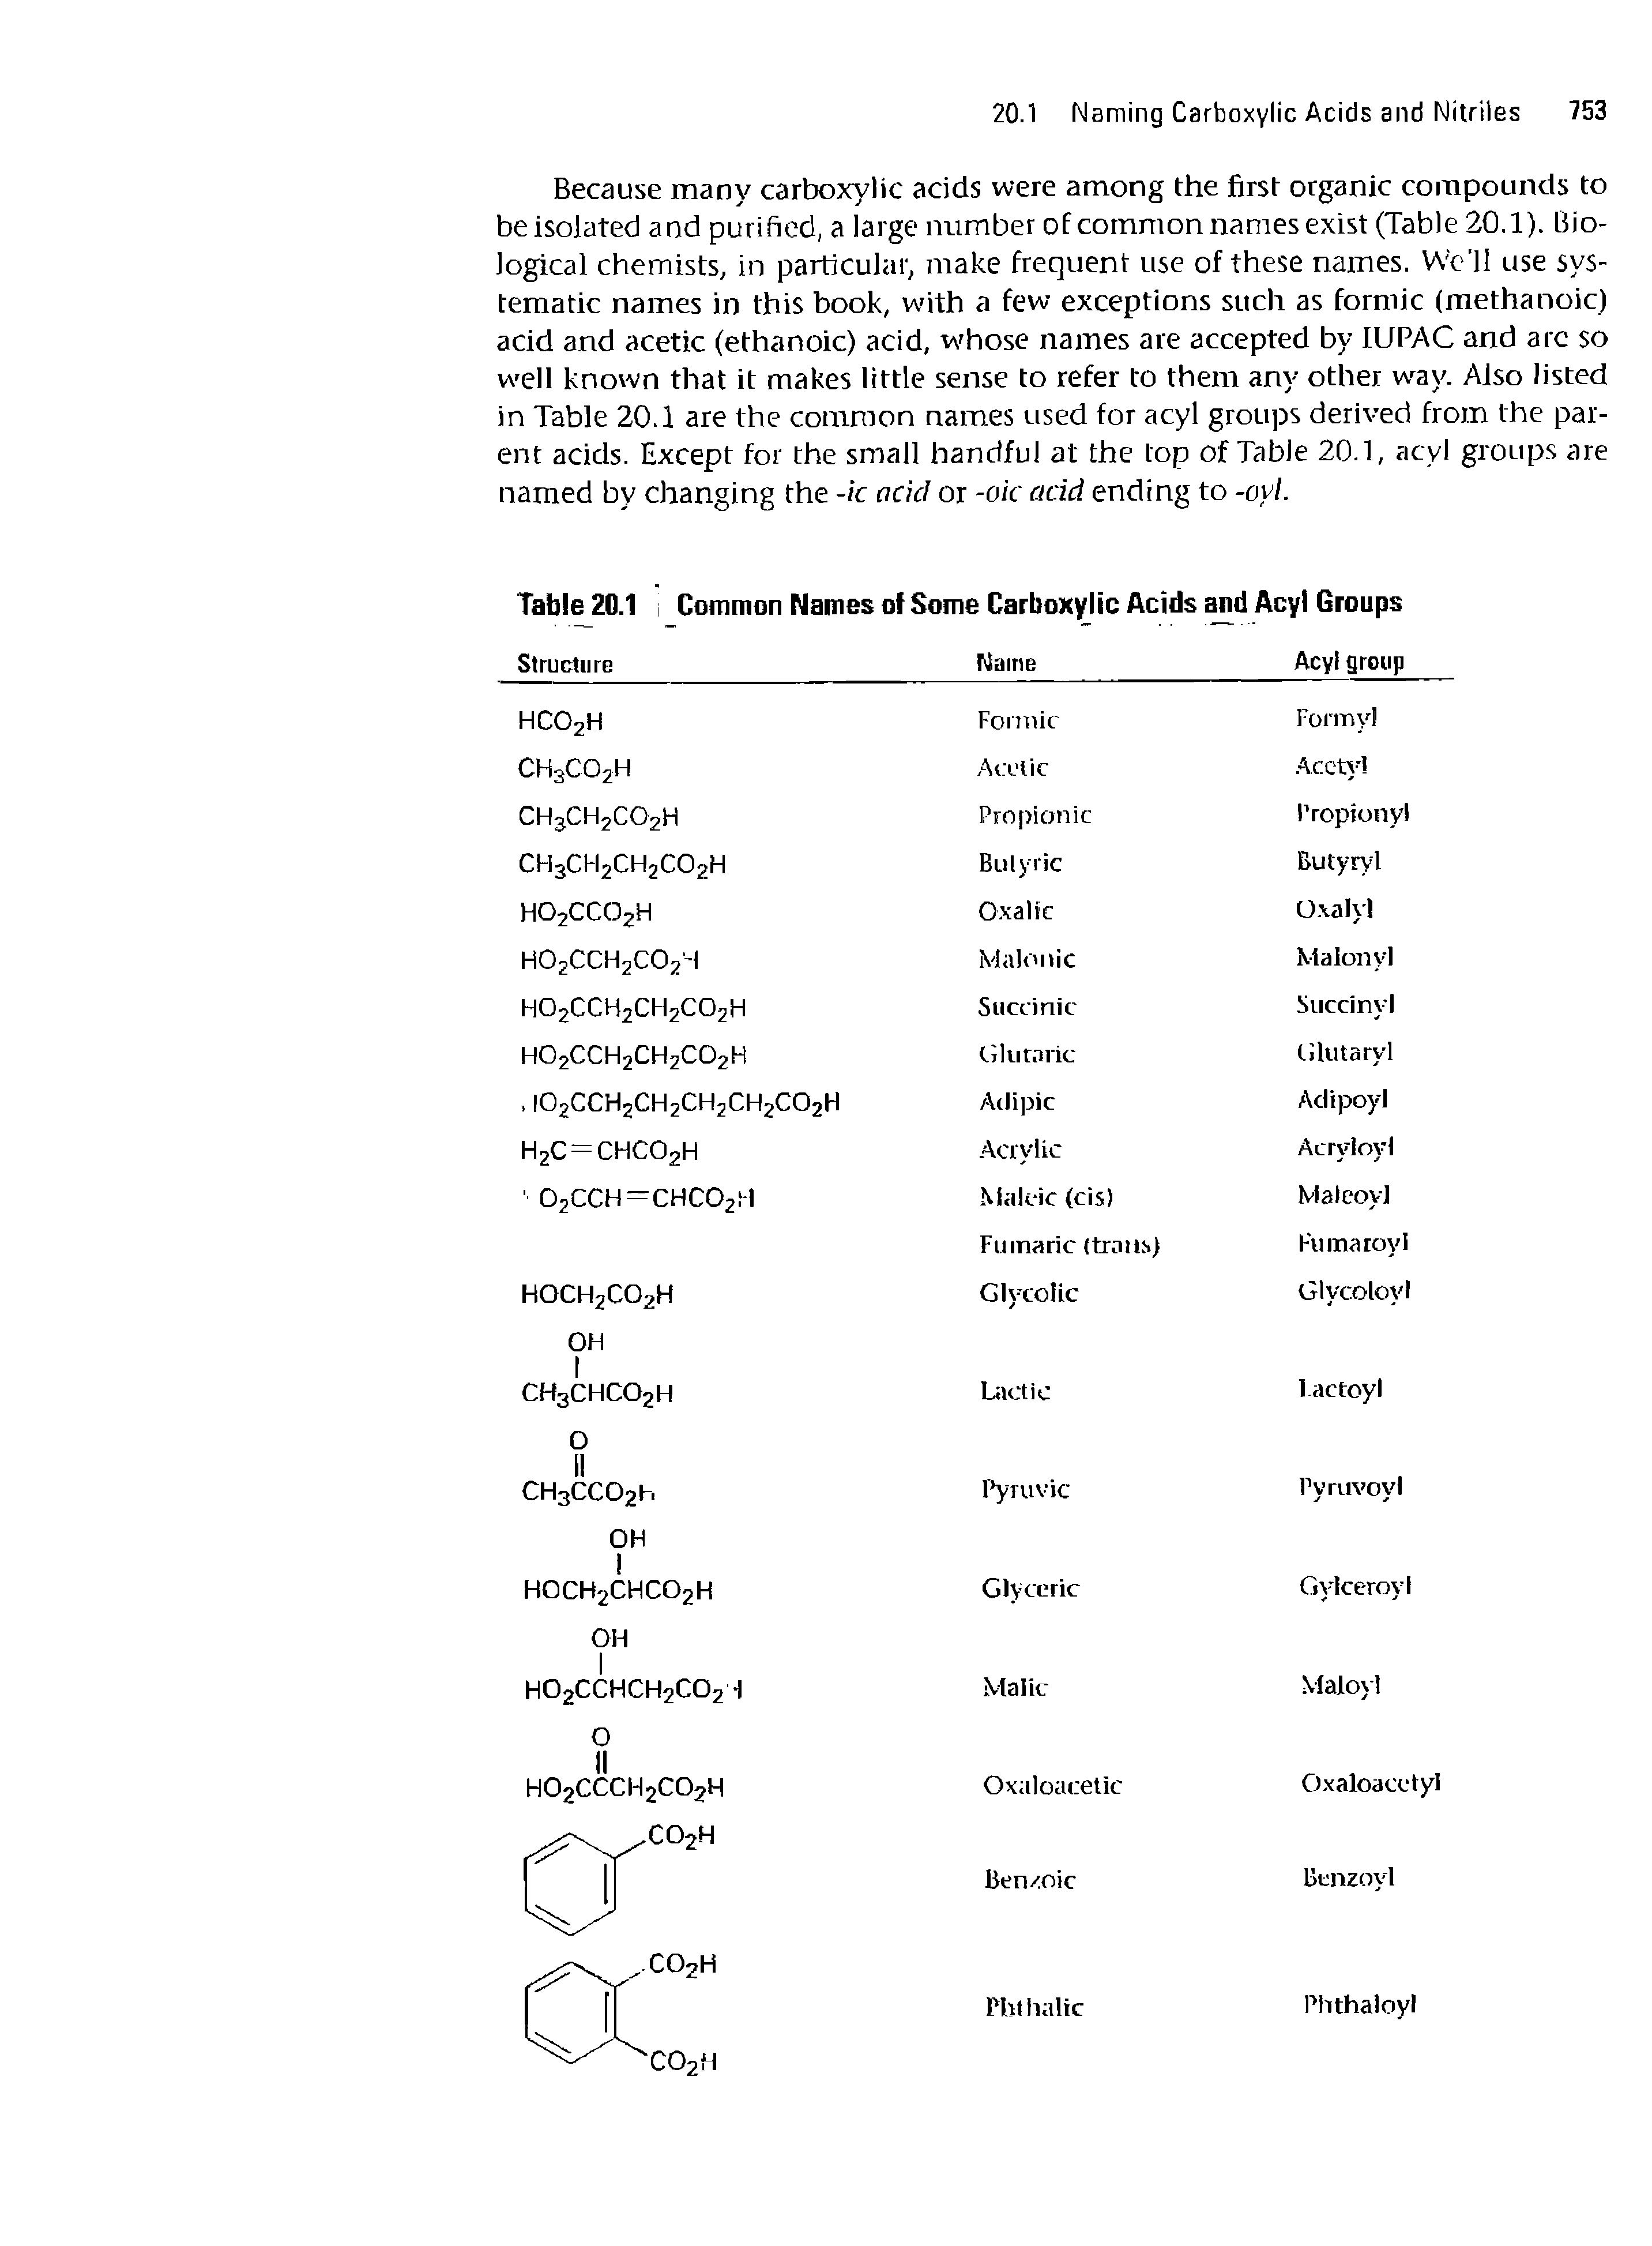 Table 20.1 Common Names of Some Carboxylic Acids and Acyl Groups...